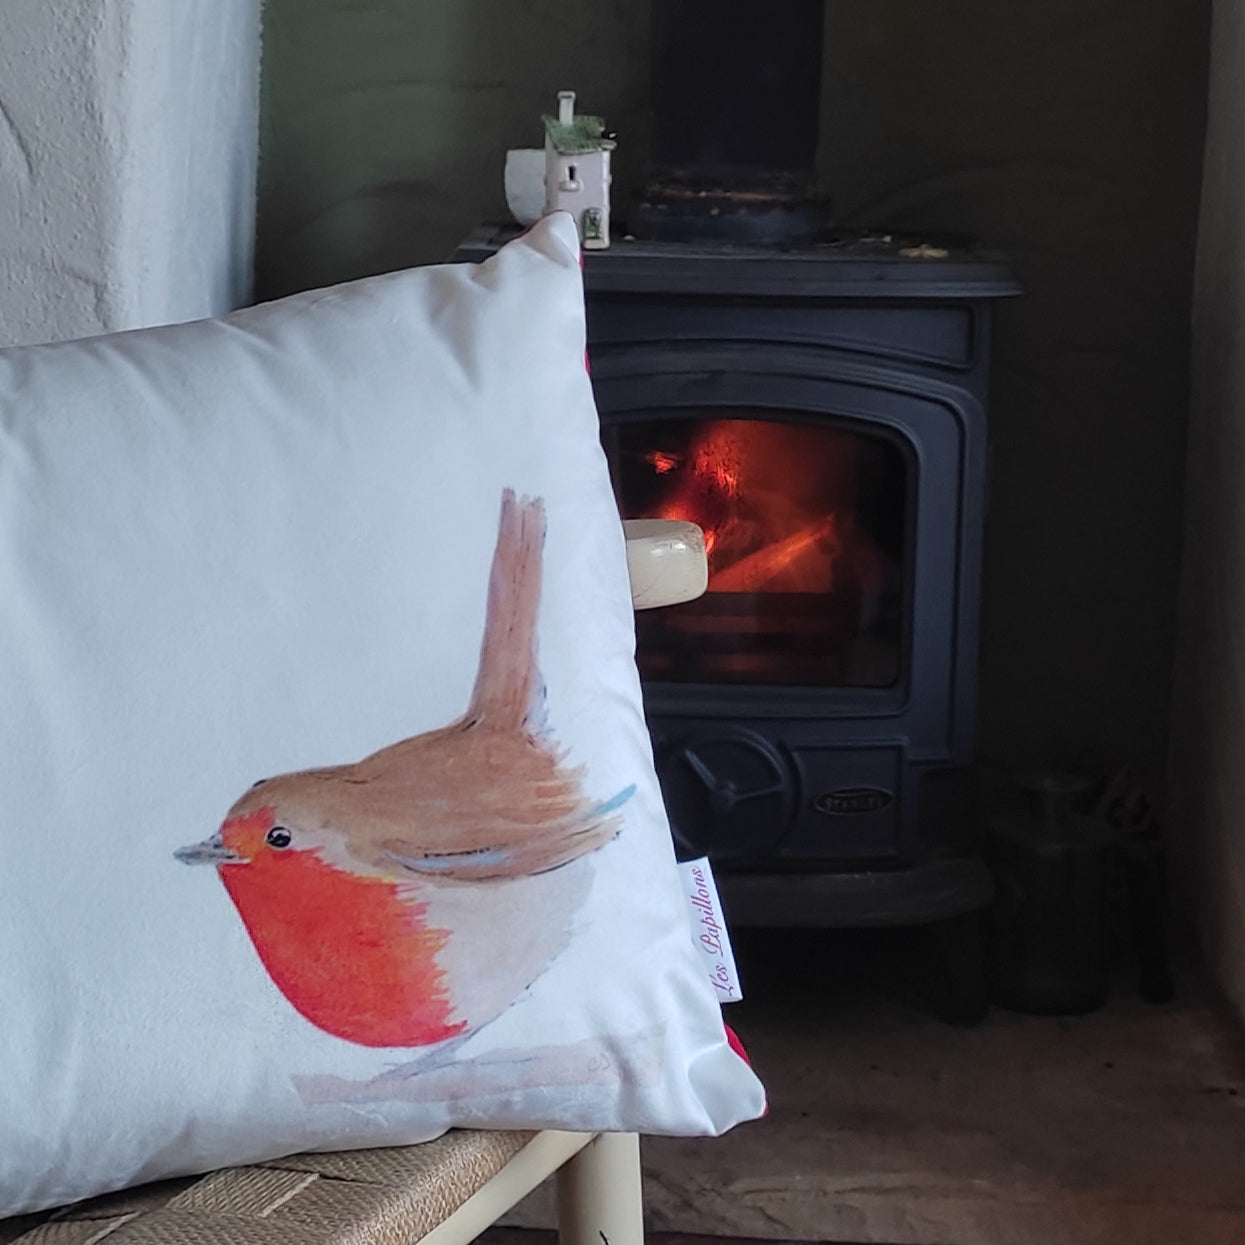 Little Robin Bolster Cushion (When loved ones are near robins appear)